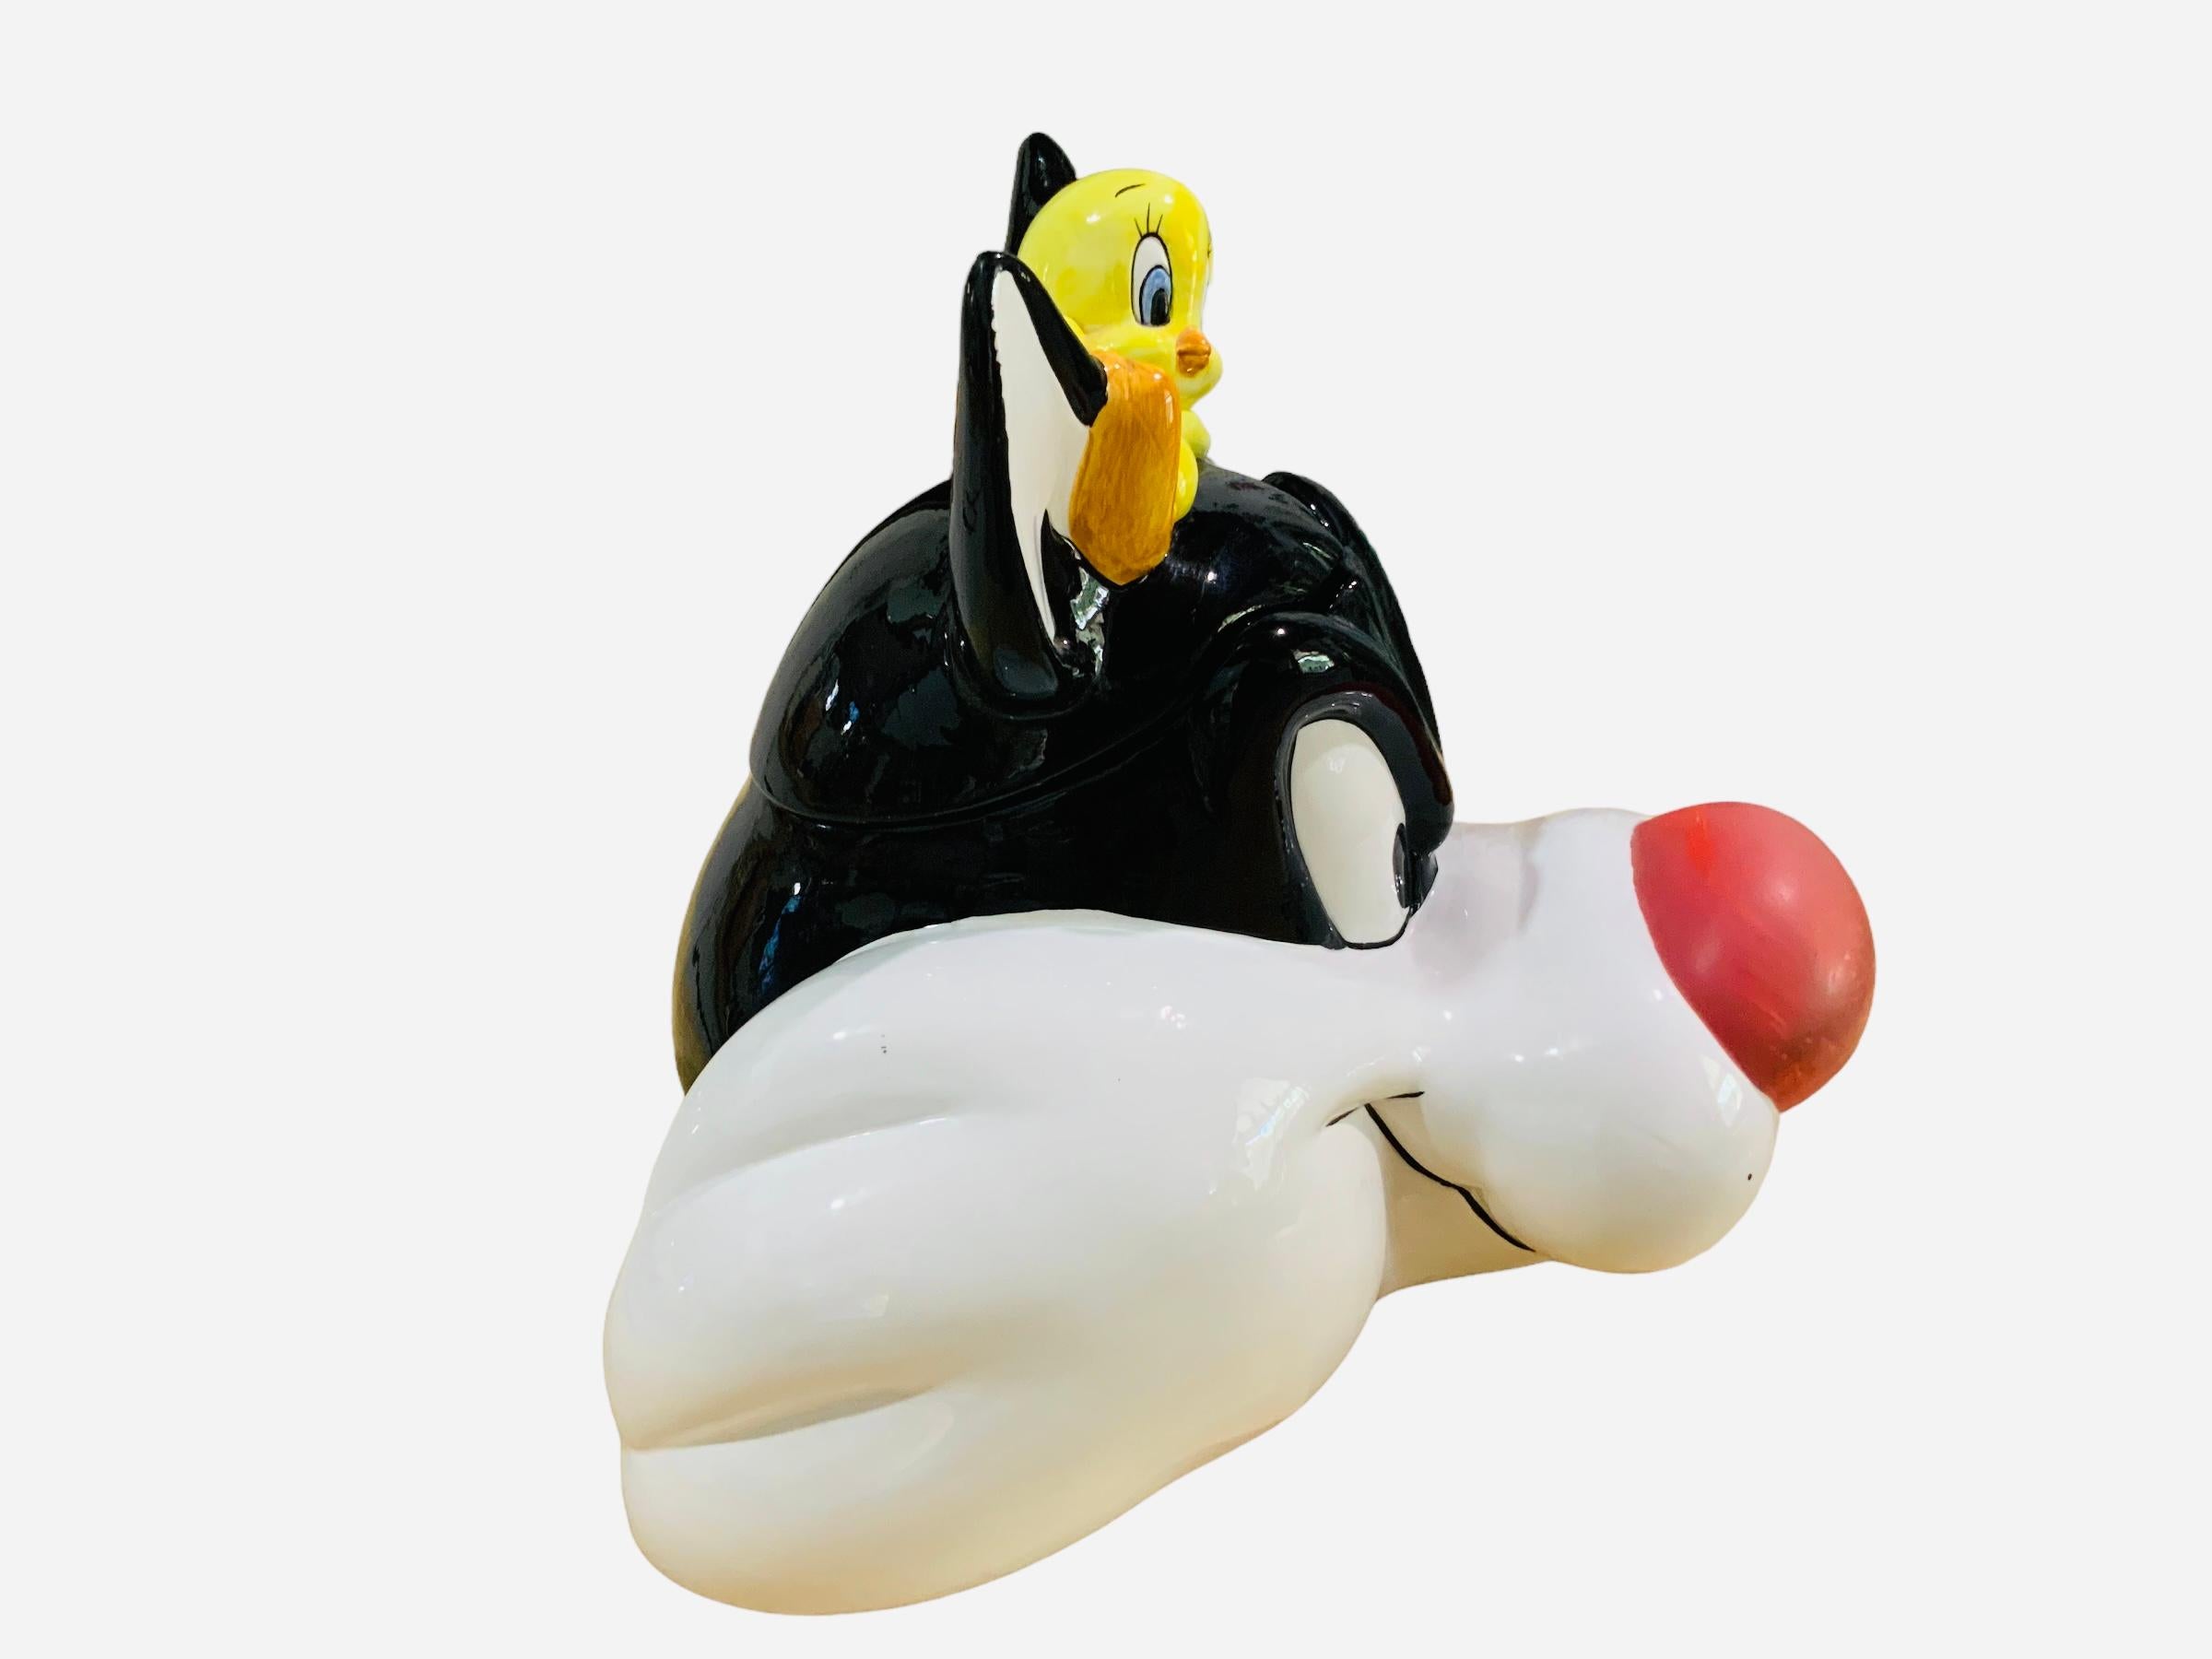 This is a Sylvester and Tweety Bird Cookie Jar. It depicts a hand painted glazed ceramic cookie jar shaped as the head of Sylvester and Tweety Bird laying down above it. Below the base is hallmarked Applause, Inc.; Warner Bros. Looney Tunes.